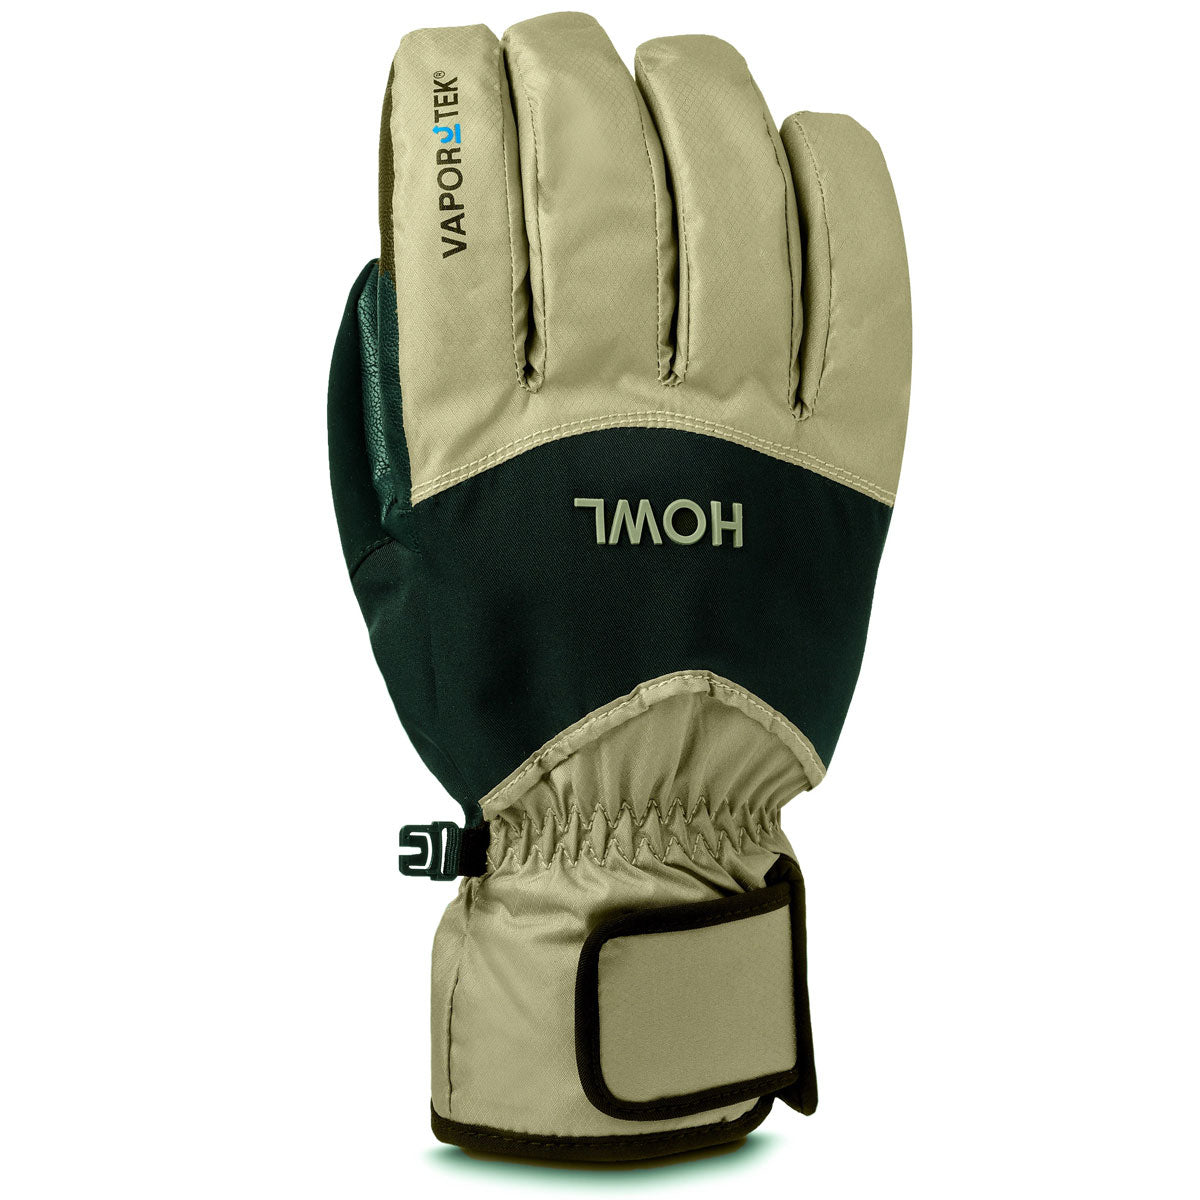 Howl Union Snowboard Gloves - Moss image 1